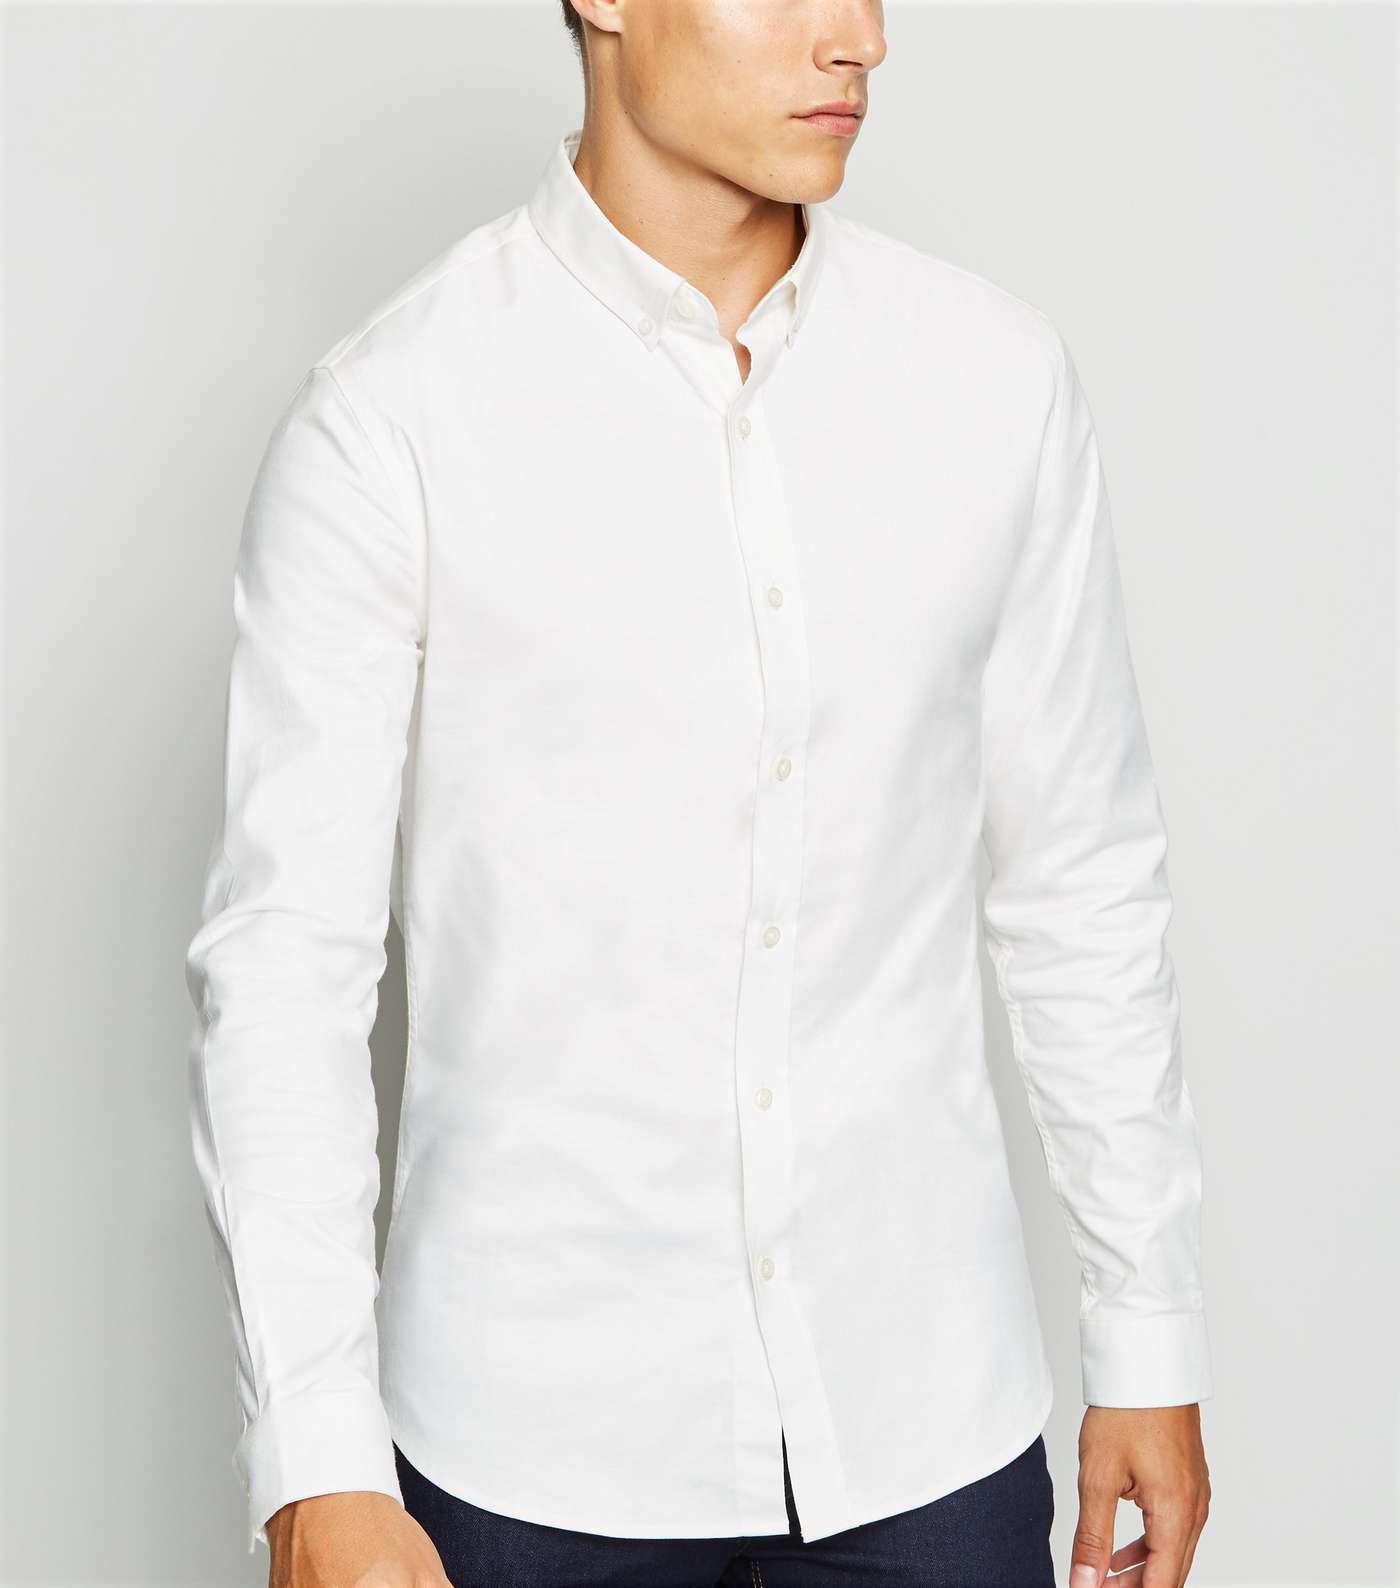 White Long Sleeve Muscle Fit Oxford Shirt